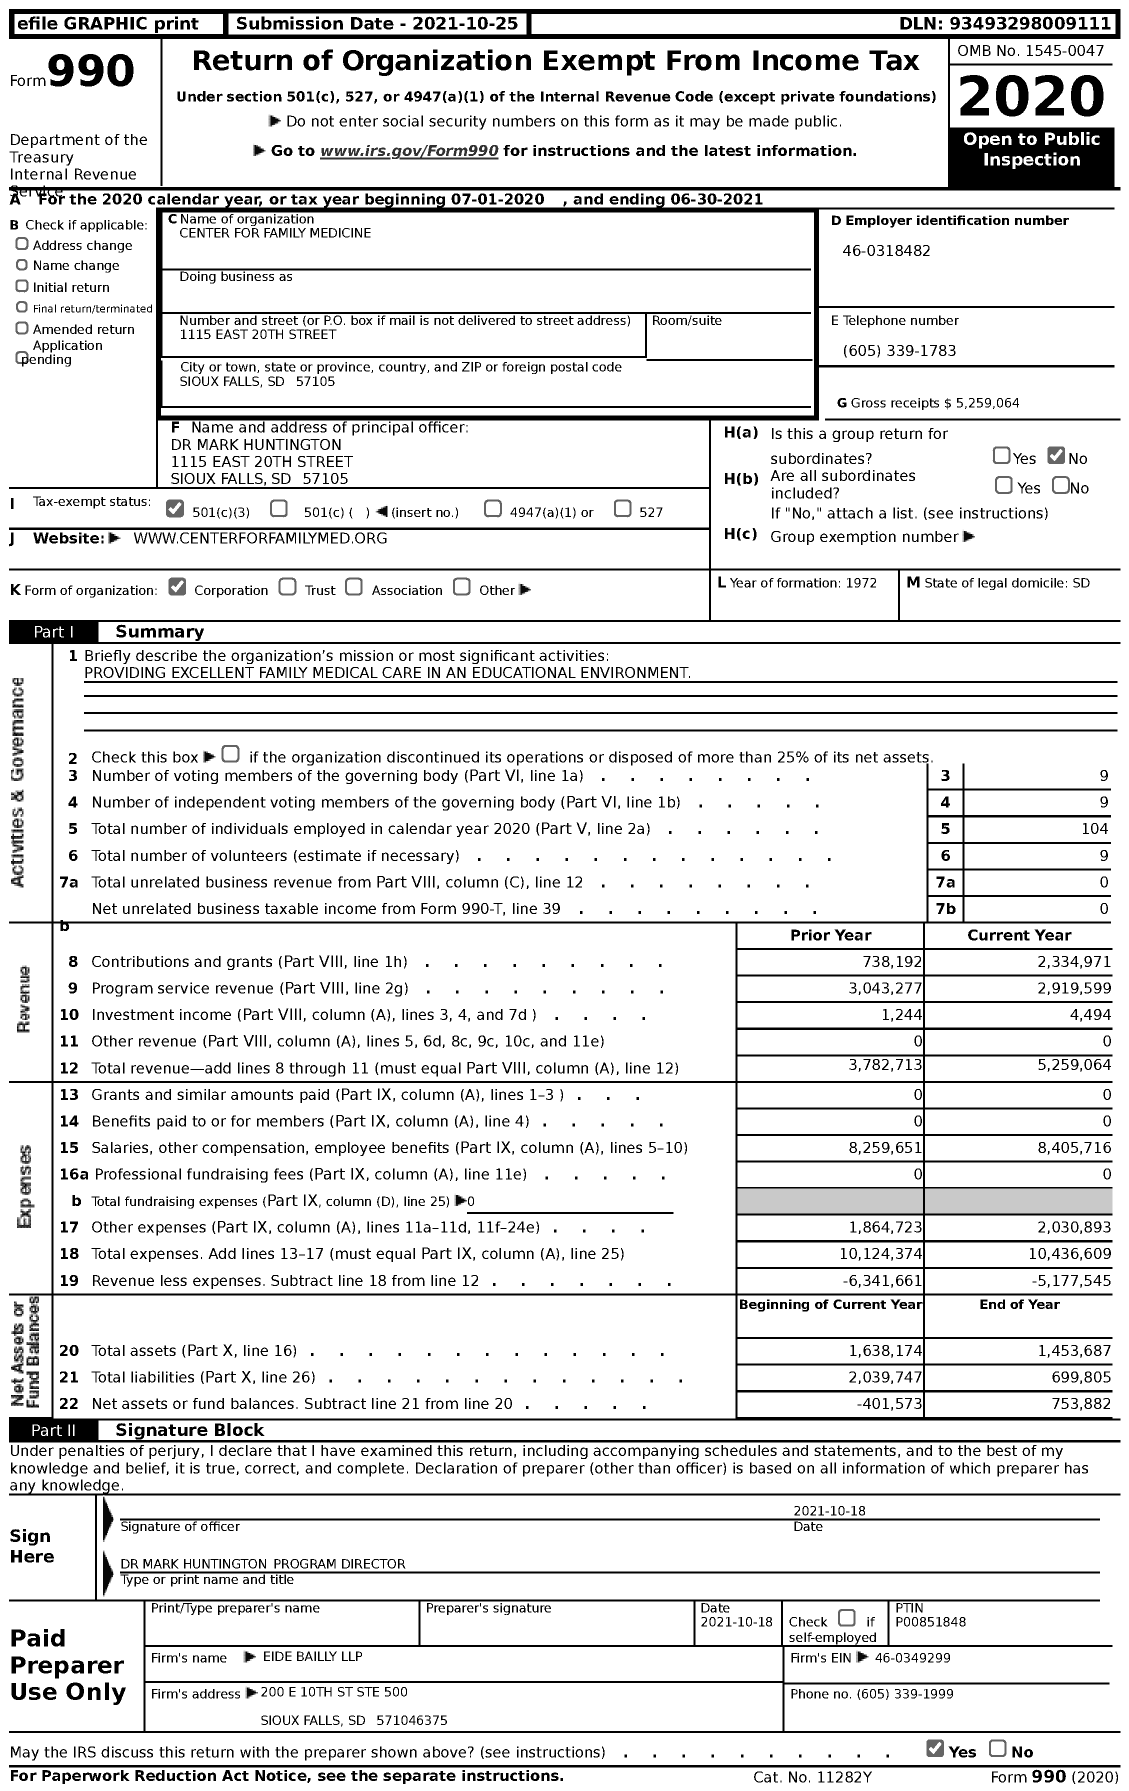 Image of first page of 2020 Form 990 for Center for Family Medicine (CFM)